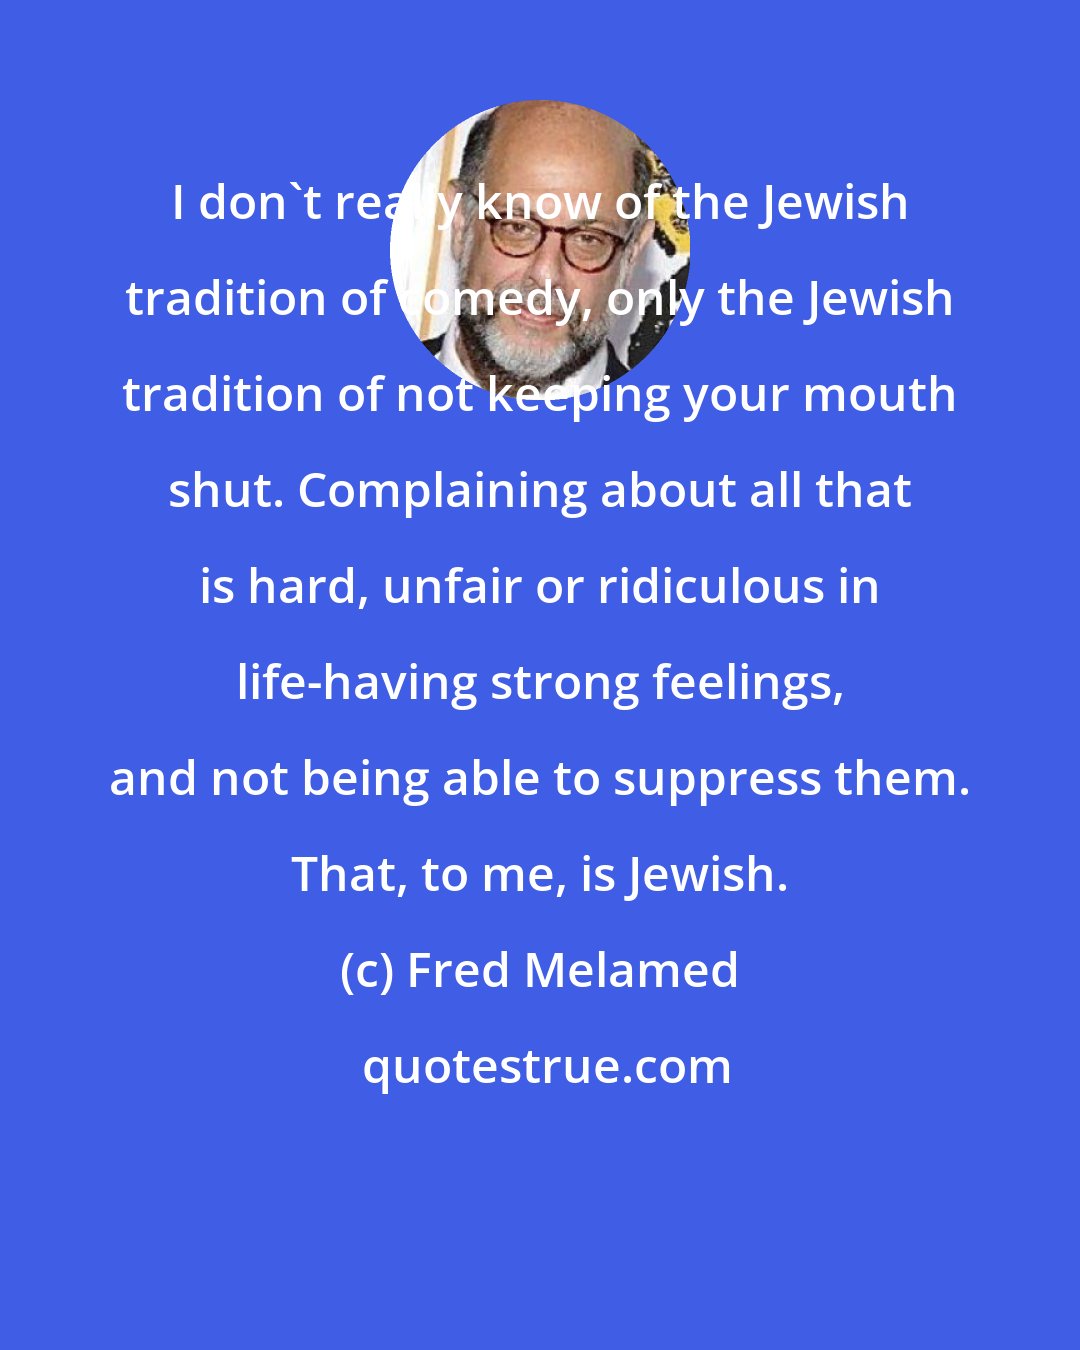 Fred Melamed: I don't really know of the Jewish tradition of comedy, only the Jewish tradition of not keeping your mouth shut. Complaining about all that is hard, unfair or ridiculous in life-having strong feelings, and not being able to suppress them. That, to me, is Jewish.